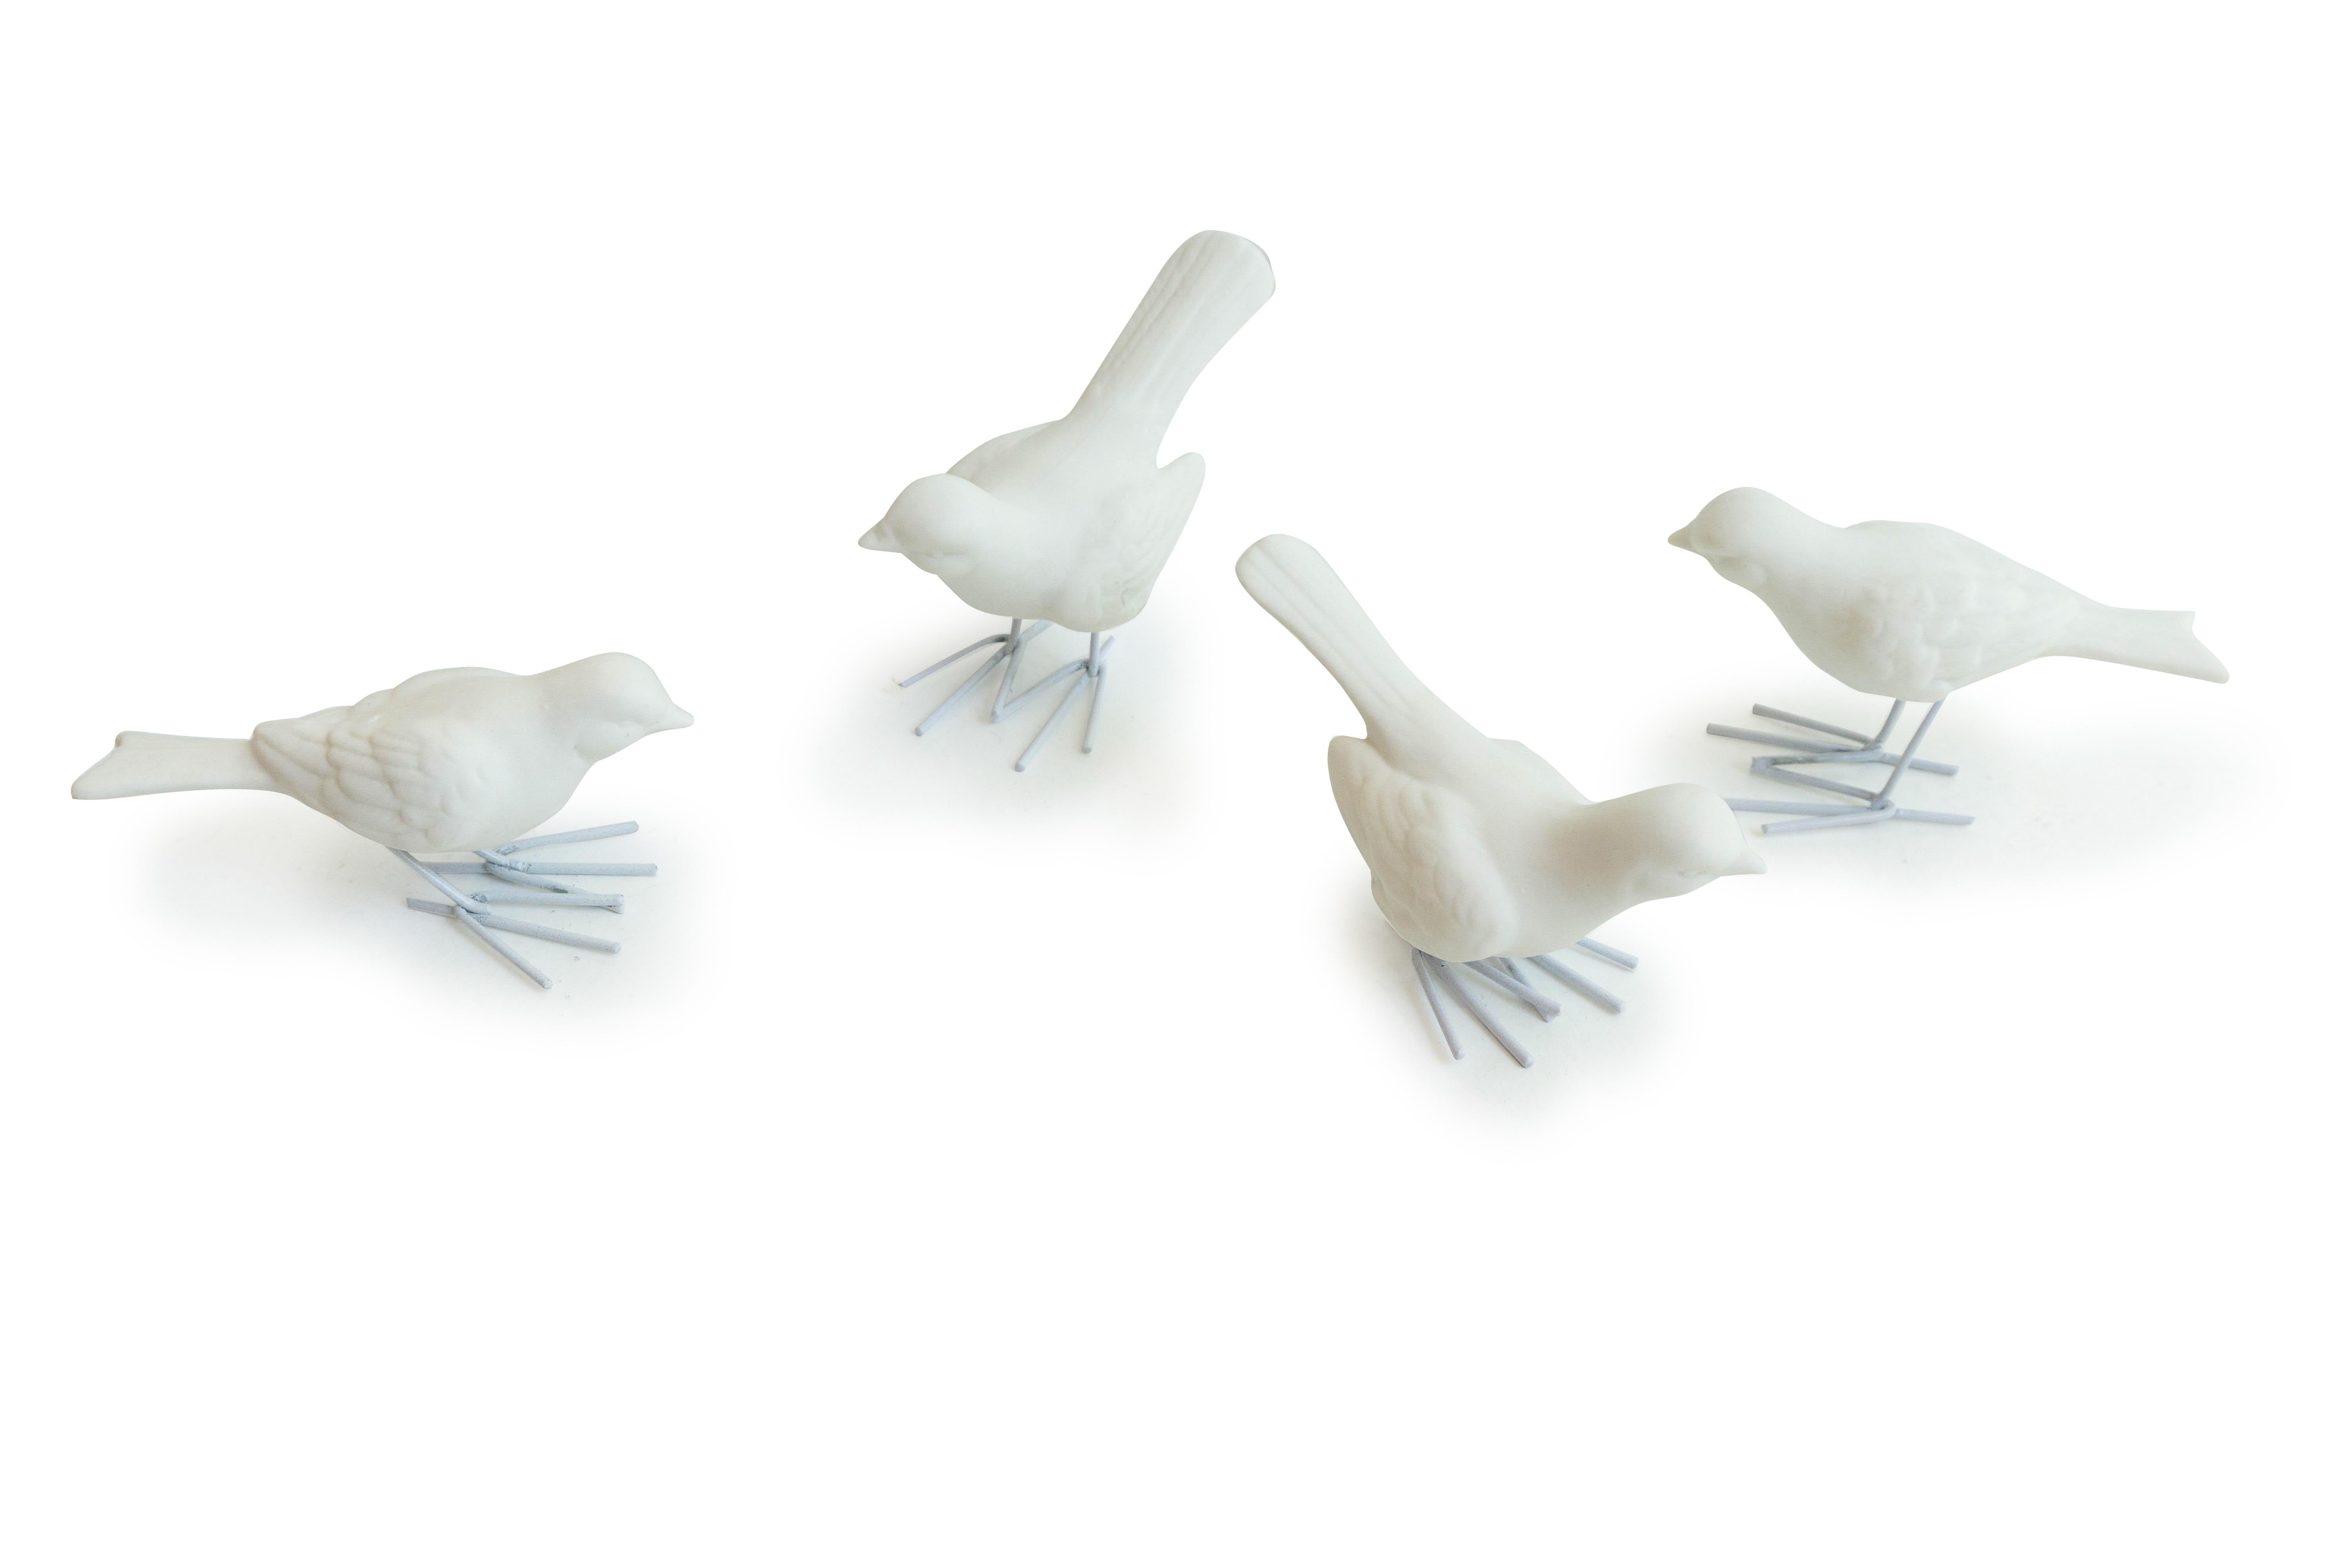 This adorable grouping of four unglazed white porcelain Starlings set on sturdy white iron legs will create happiness throughout the year. Created in the Netherlands, this very modern version of glazed porcelain figurines is a perfect gift for bird